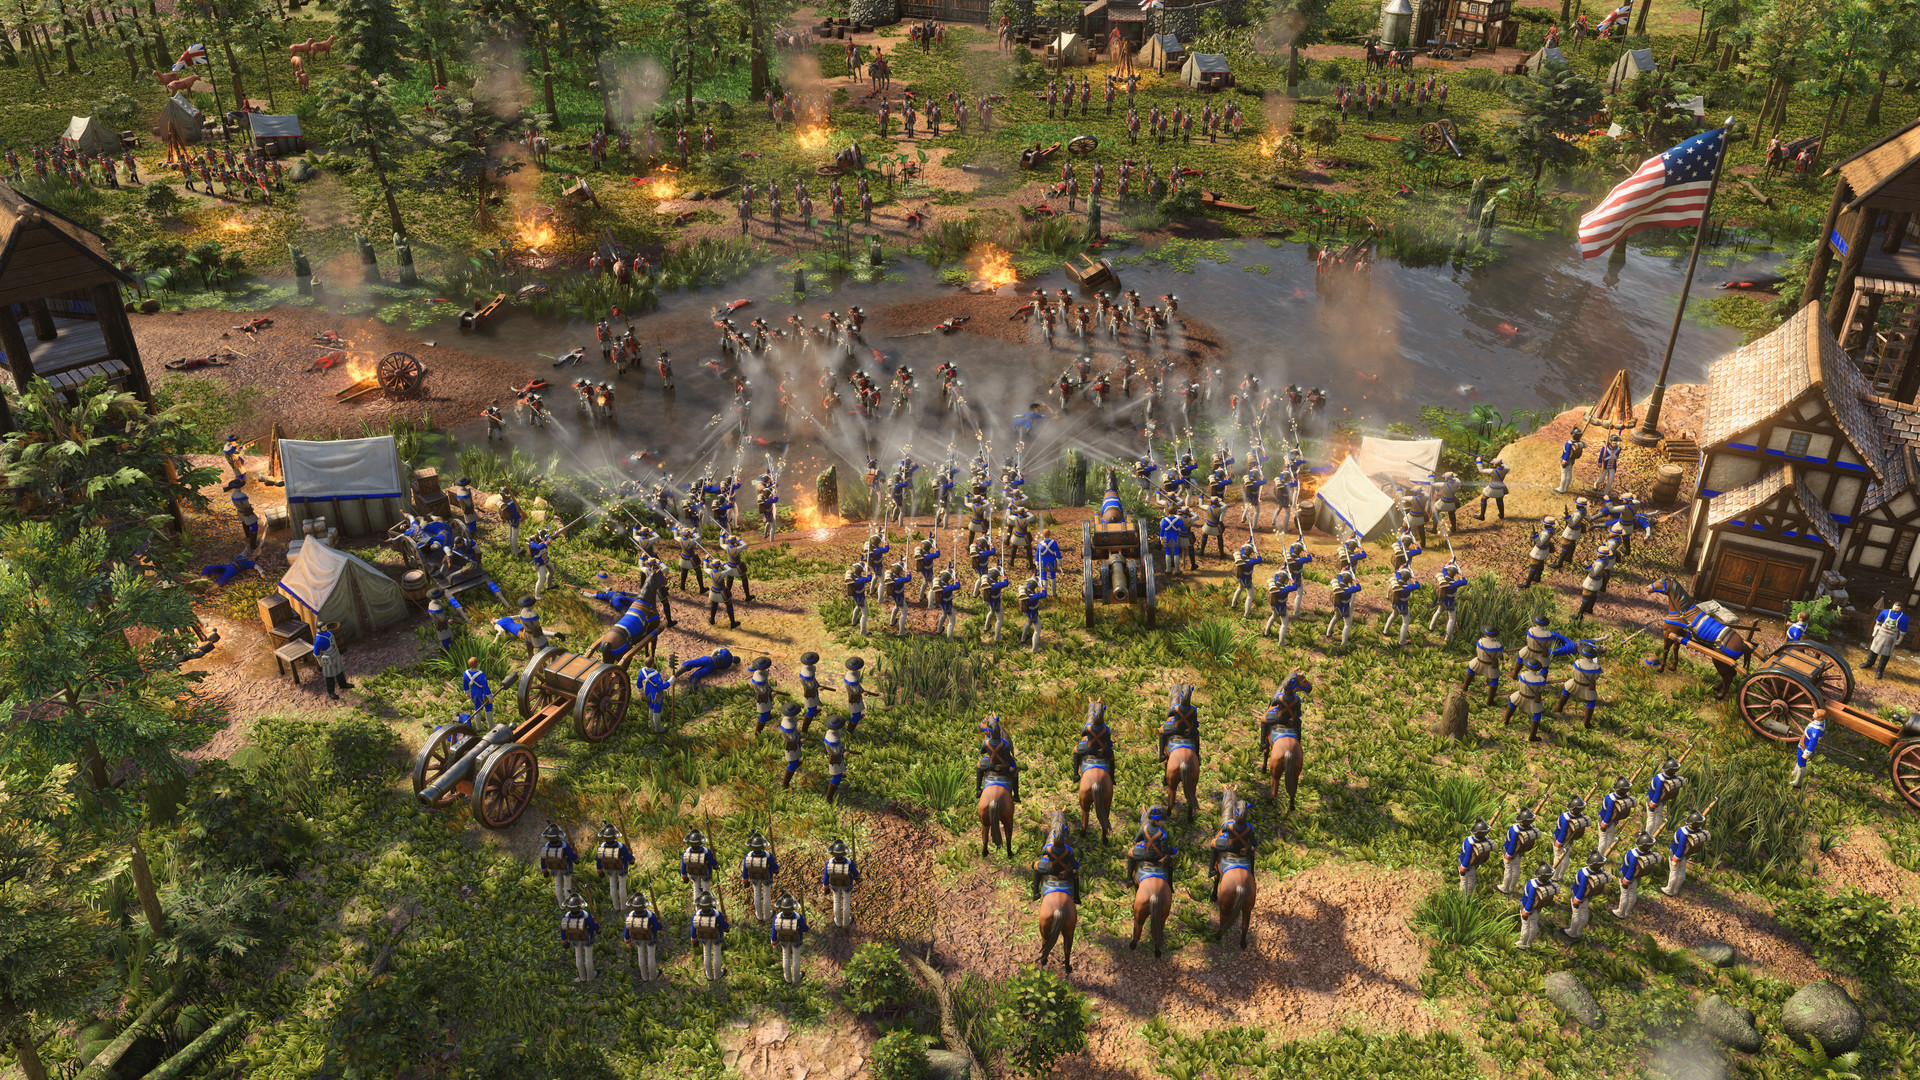 Age of Empires III: Definitive Edition - United States Civilization Featured Screenshot #1